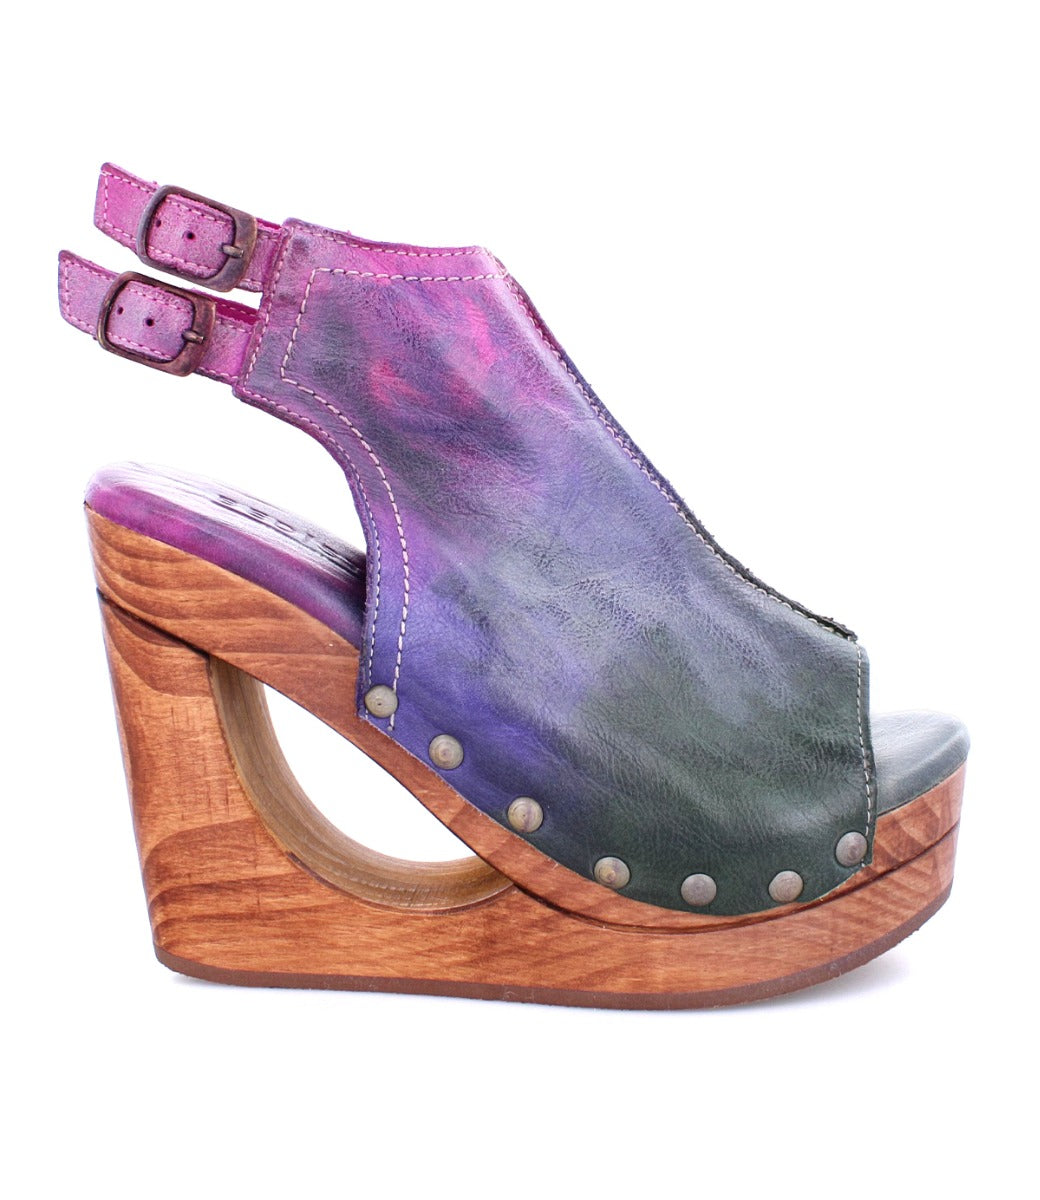 A pair of Imelda shoes with a wooden platform by Bed Stu.